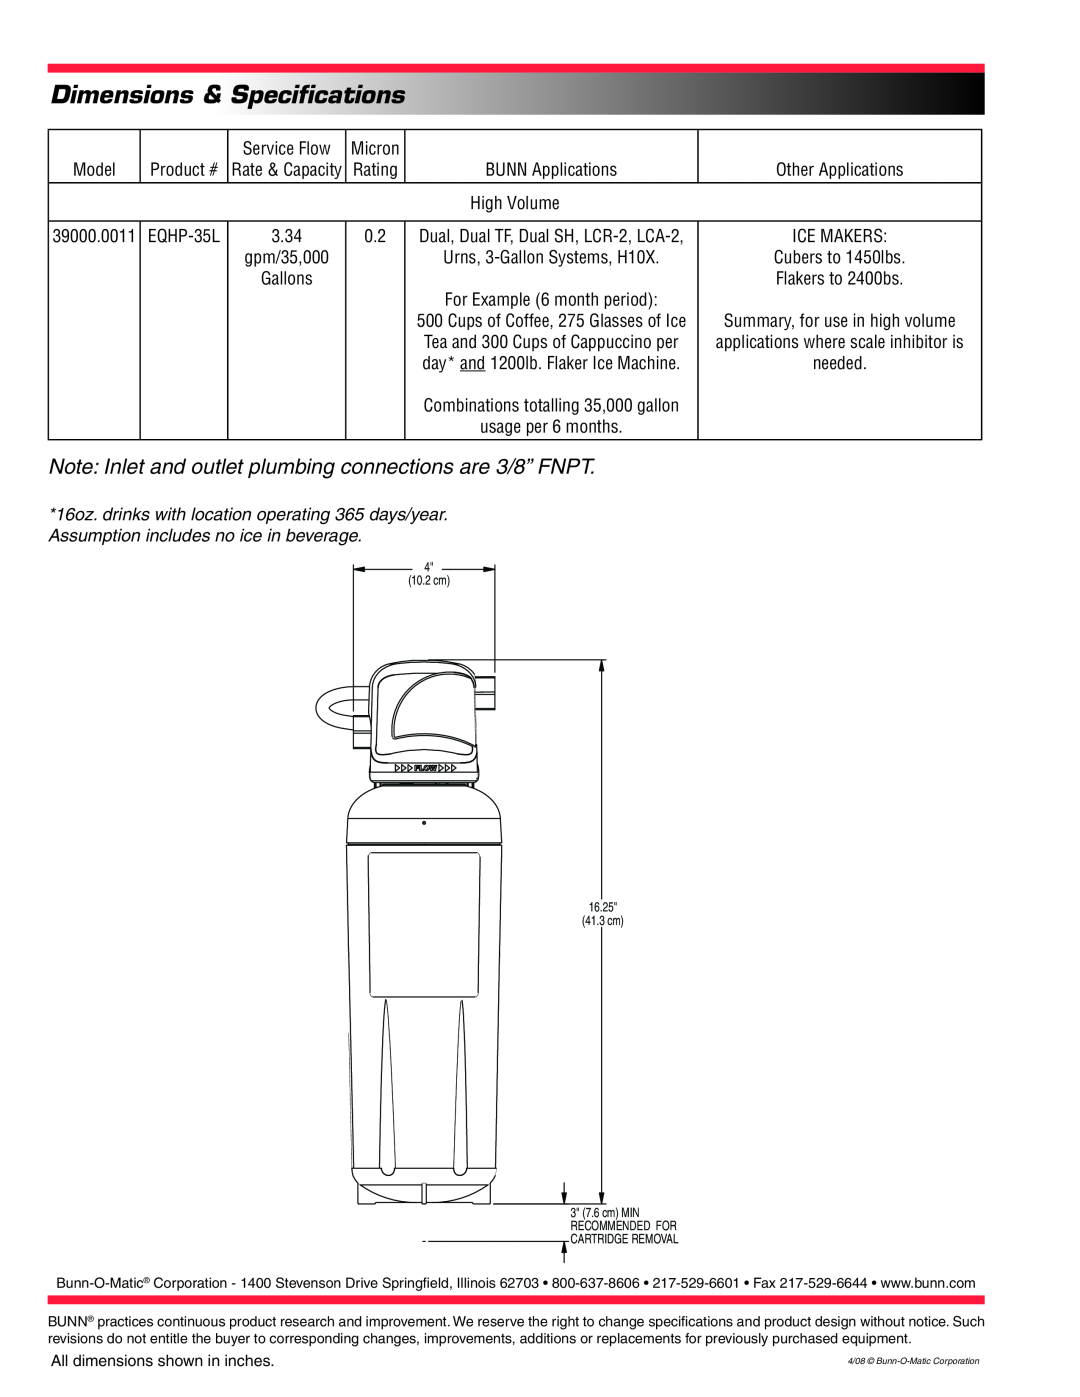 Bunn EQHP-35L specifications Dimensions & Specifications, Note Inlet and outlet plumbing connections are 3/8” FNPT 